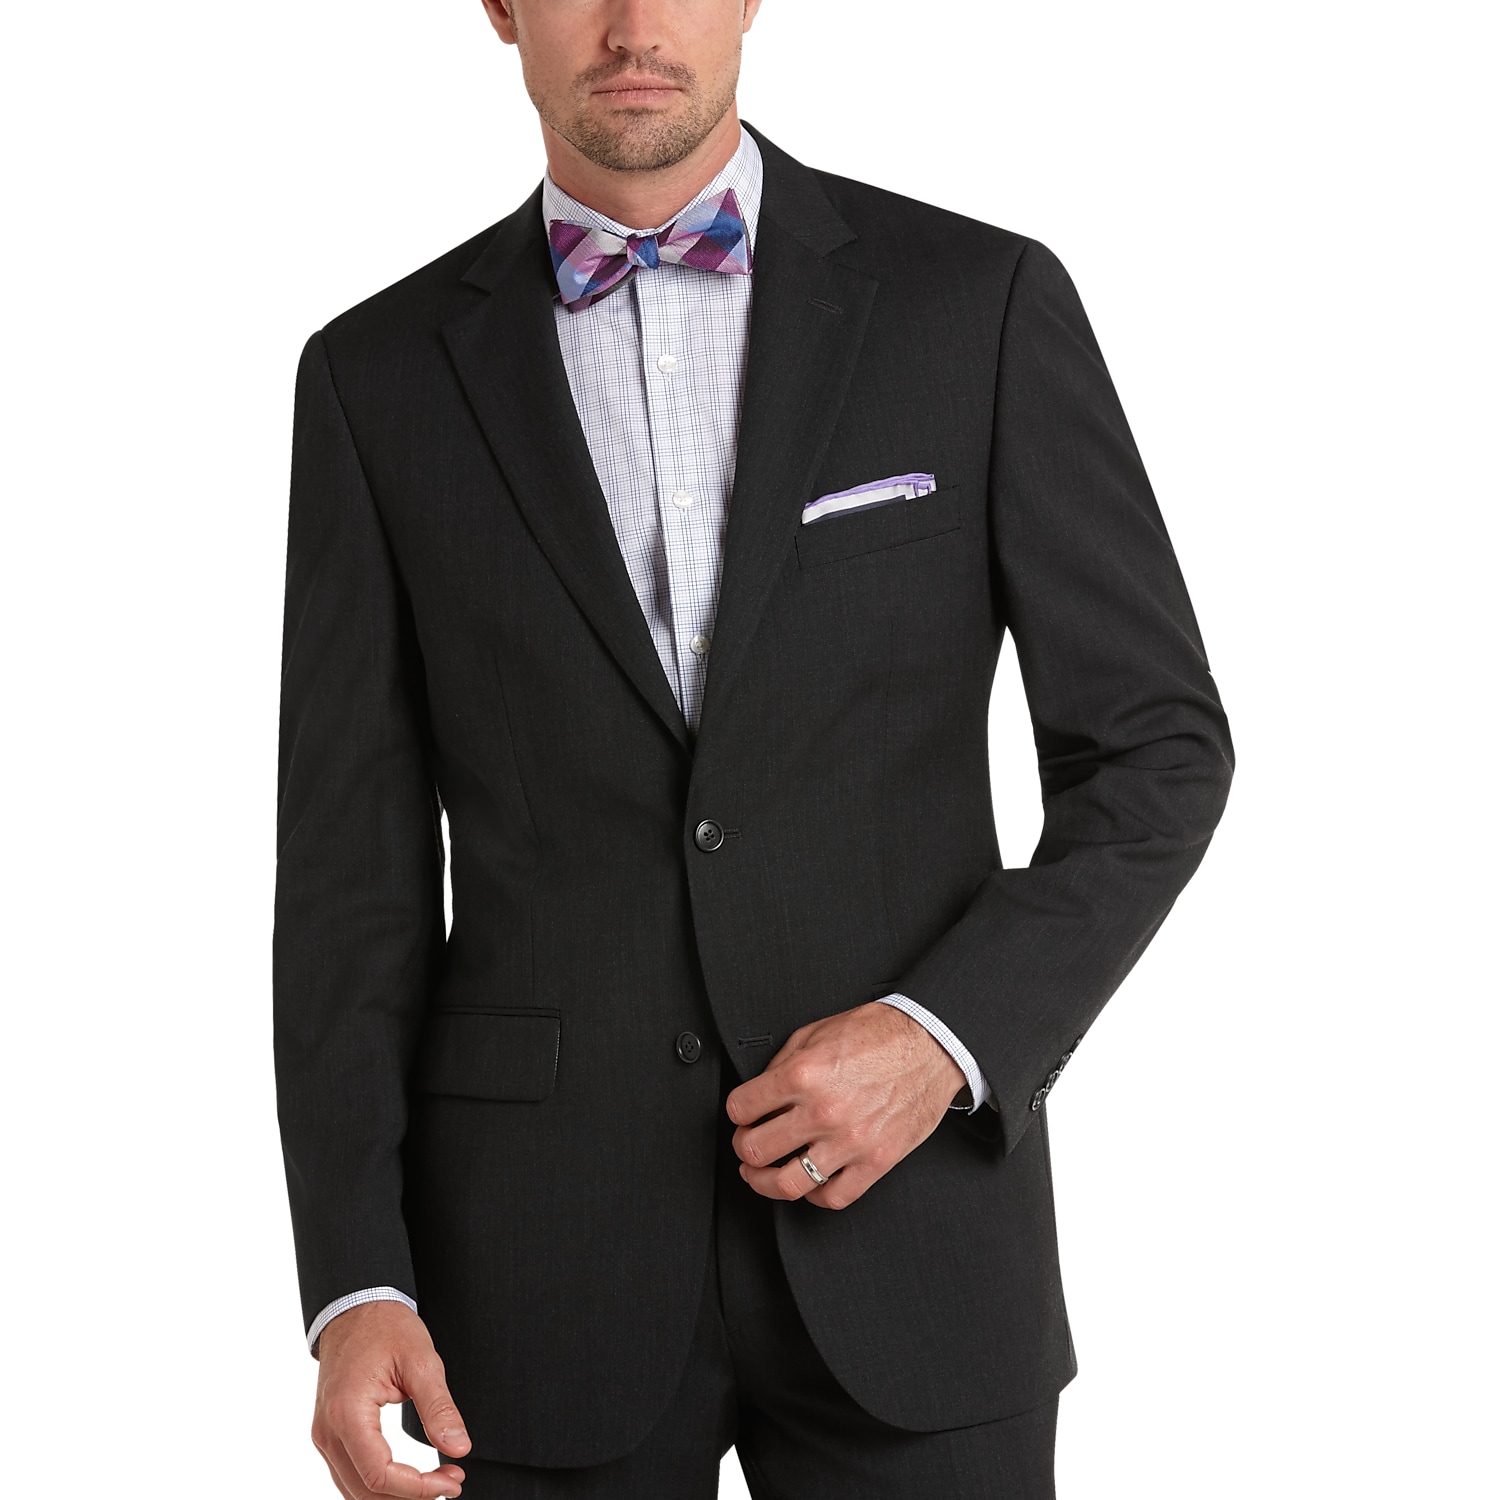 Mens Charcoal Grey Suit | My Dress Tip